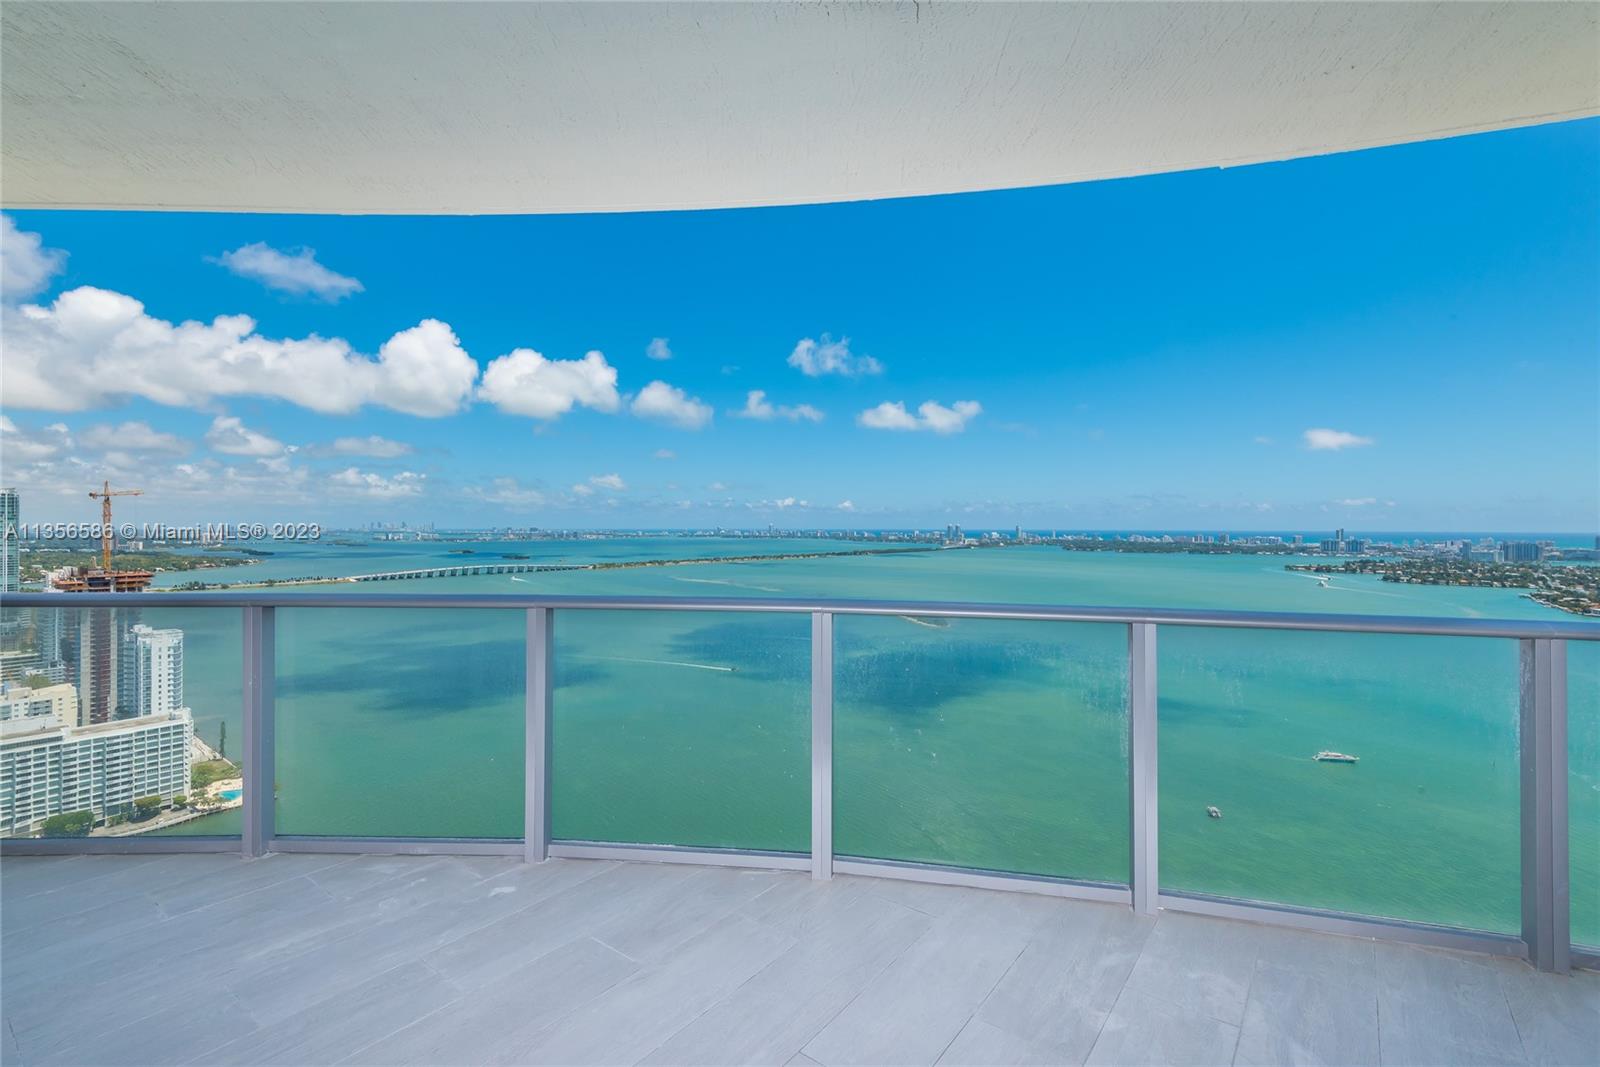 Gorgeous and spacious unit with spectacular direct water views located in the heart of Miami's Art and Entertainment District. This 3 bedroom/ 4 full bath condo with den has top of the line finishes and appliances. All bedrooms have on suite bathrooms and custom closets. Floor to ceiling windows with motorized window treatment throughout with blackout in the bedrooms. Live in luxury, call today for a showing!